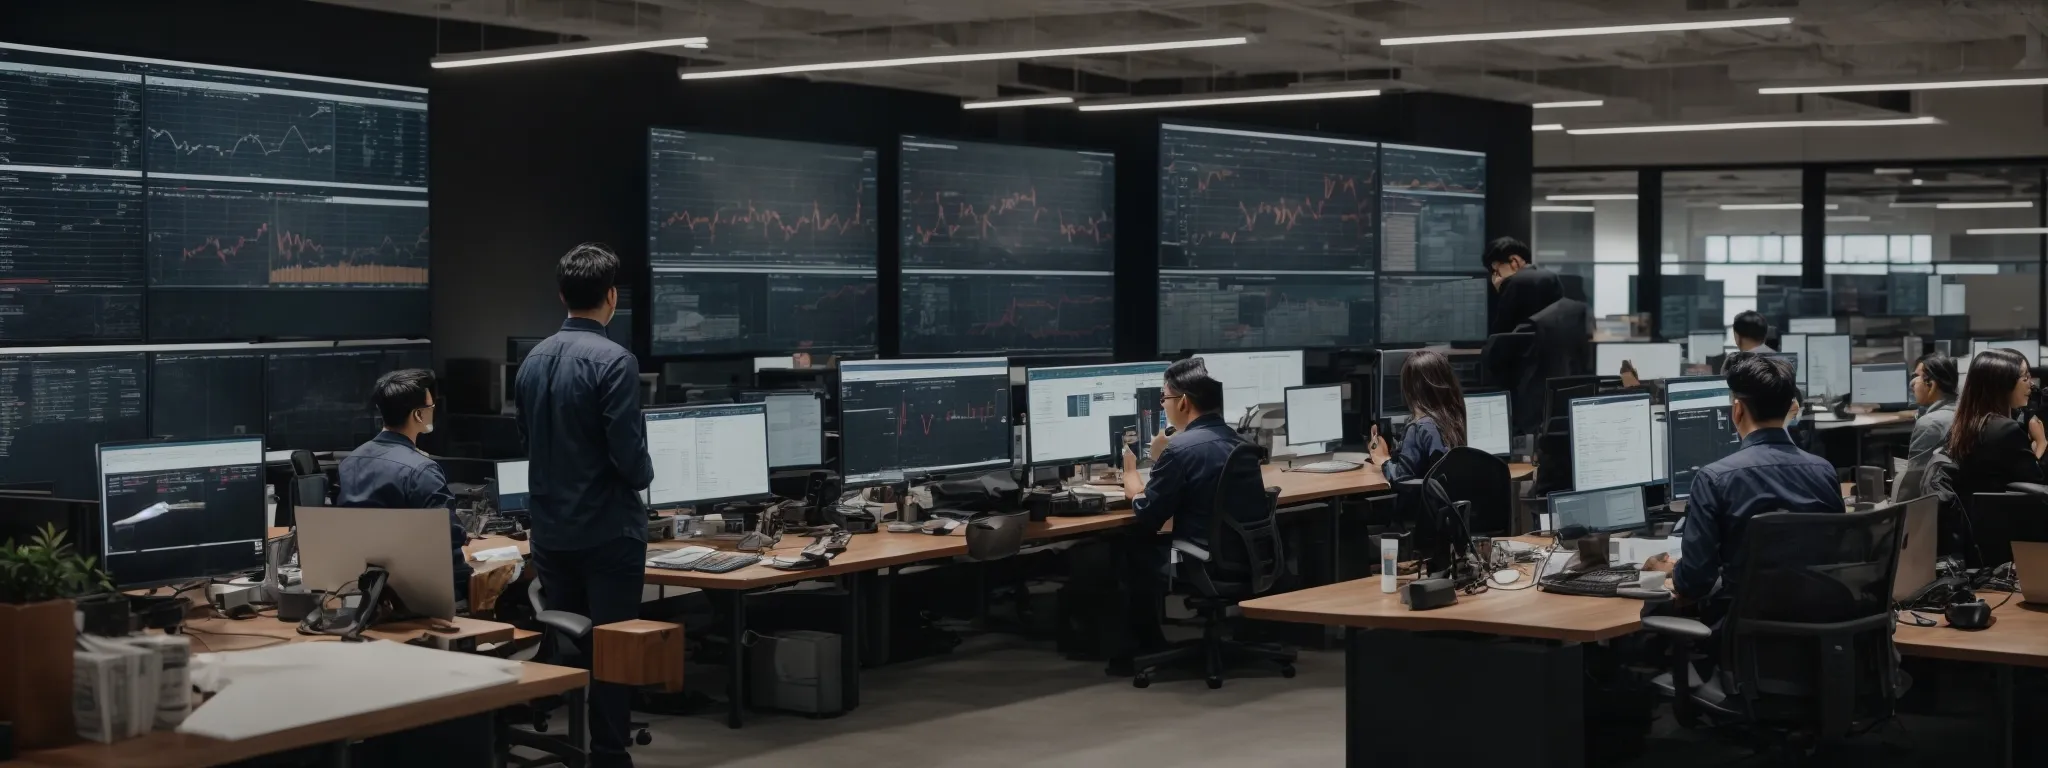 a bustling ecommerce team analyzes data dashboards on large screens while strategizing in a modern office setting.